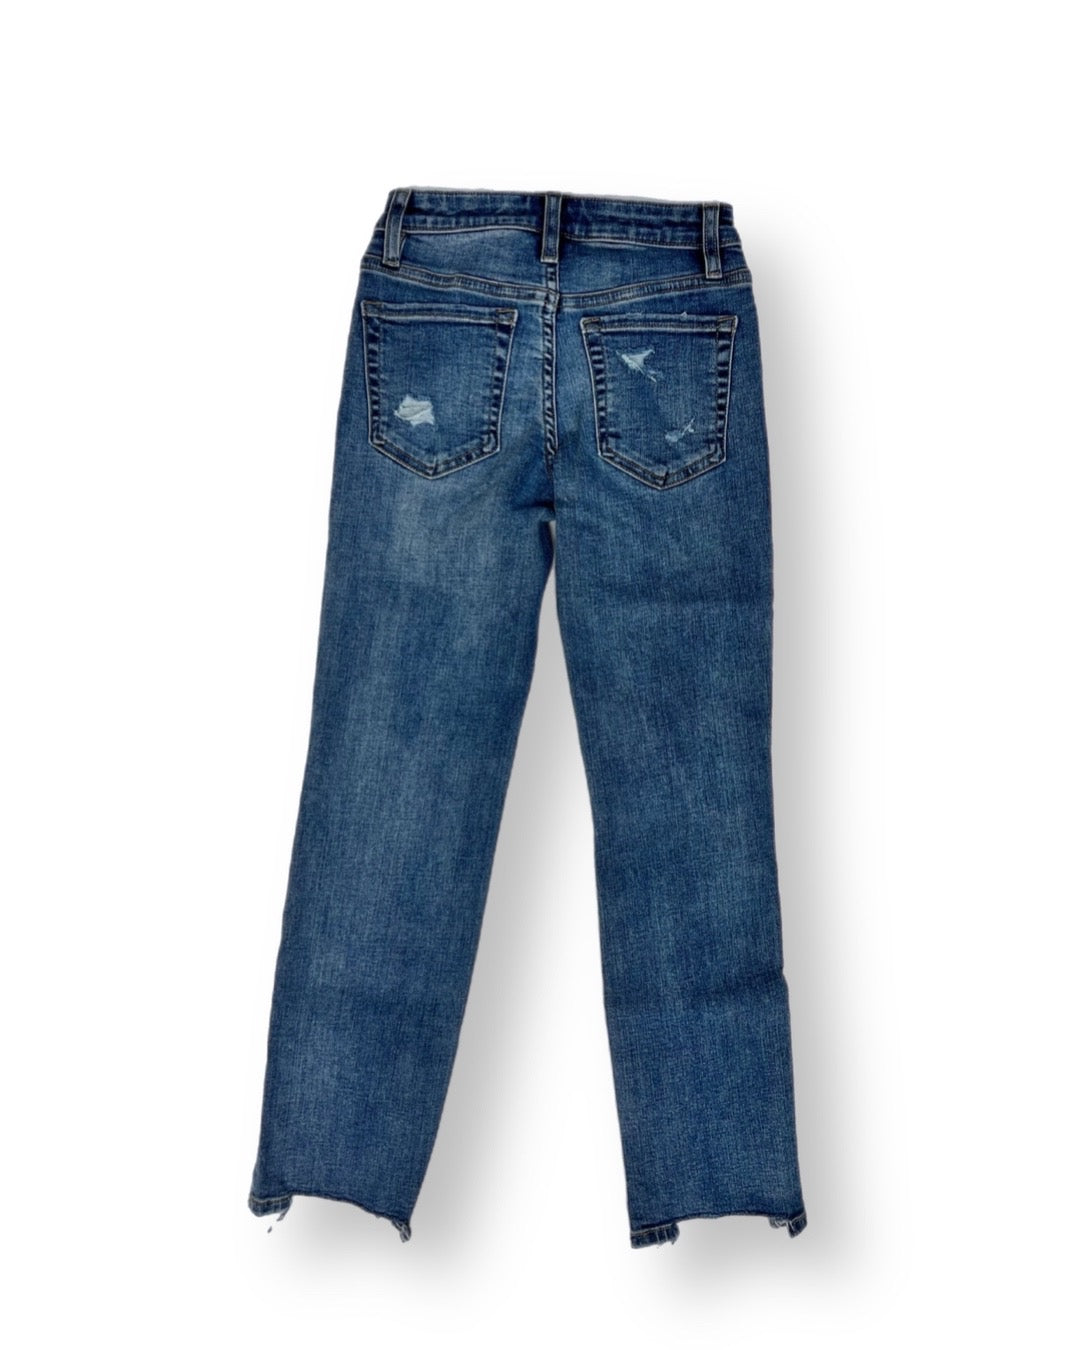 Katie J GIRL - New Yorker Jeans - Mid Wash